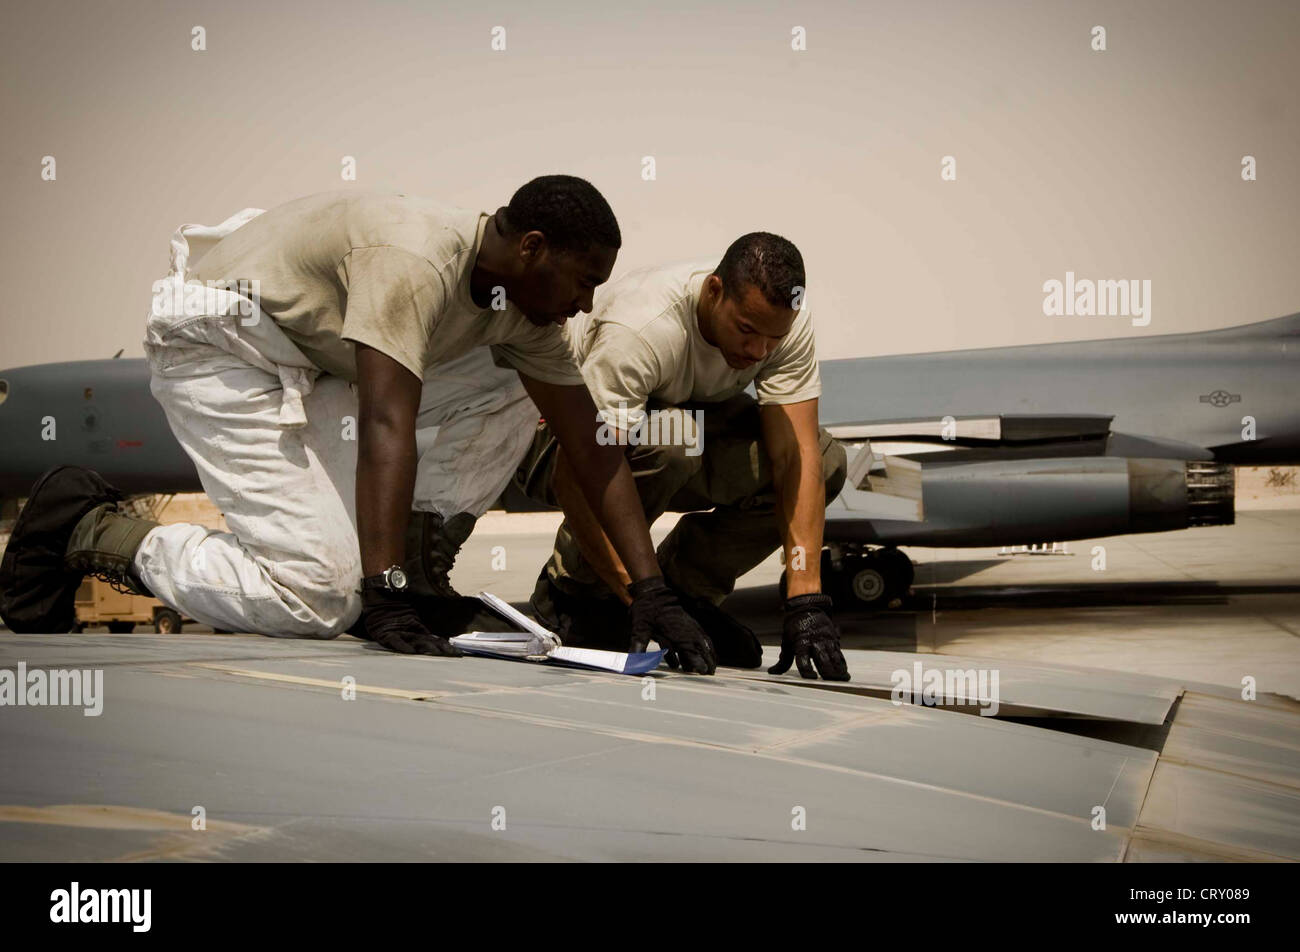 U.S. Air Force Senior Airman Brandon Wharton (foreground), crew chief, and Senior Airman Robert Farris, electrical technician, inspect the spoiler of a B-1 Lancer during a routine post-flight inspection in Southwest Asia, July 2, 2012. Both Airmen are assigned to the 379th Expeditionary Aircraft Maintenance Squadron and are deployed from Dyess Air Force Base, Texas. Wharton is a native of Huntsville, Ala., and Farris is from Killen, Texas. Stock Photo